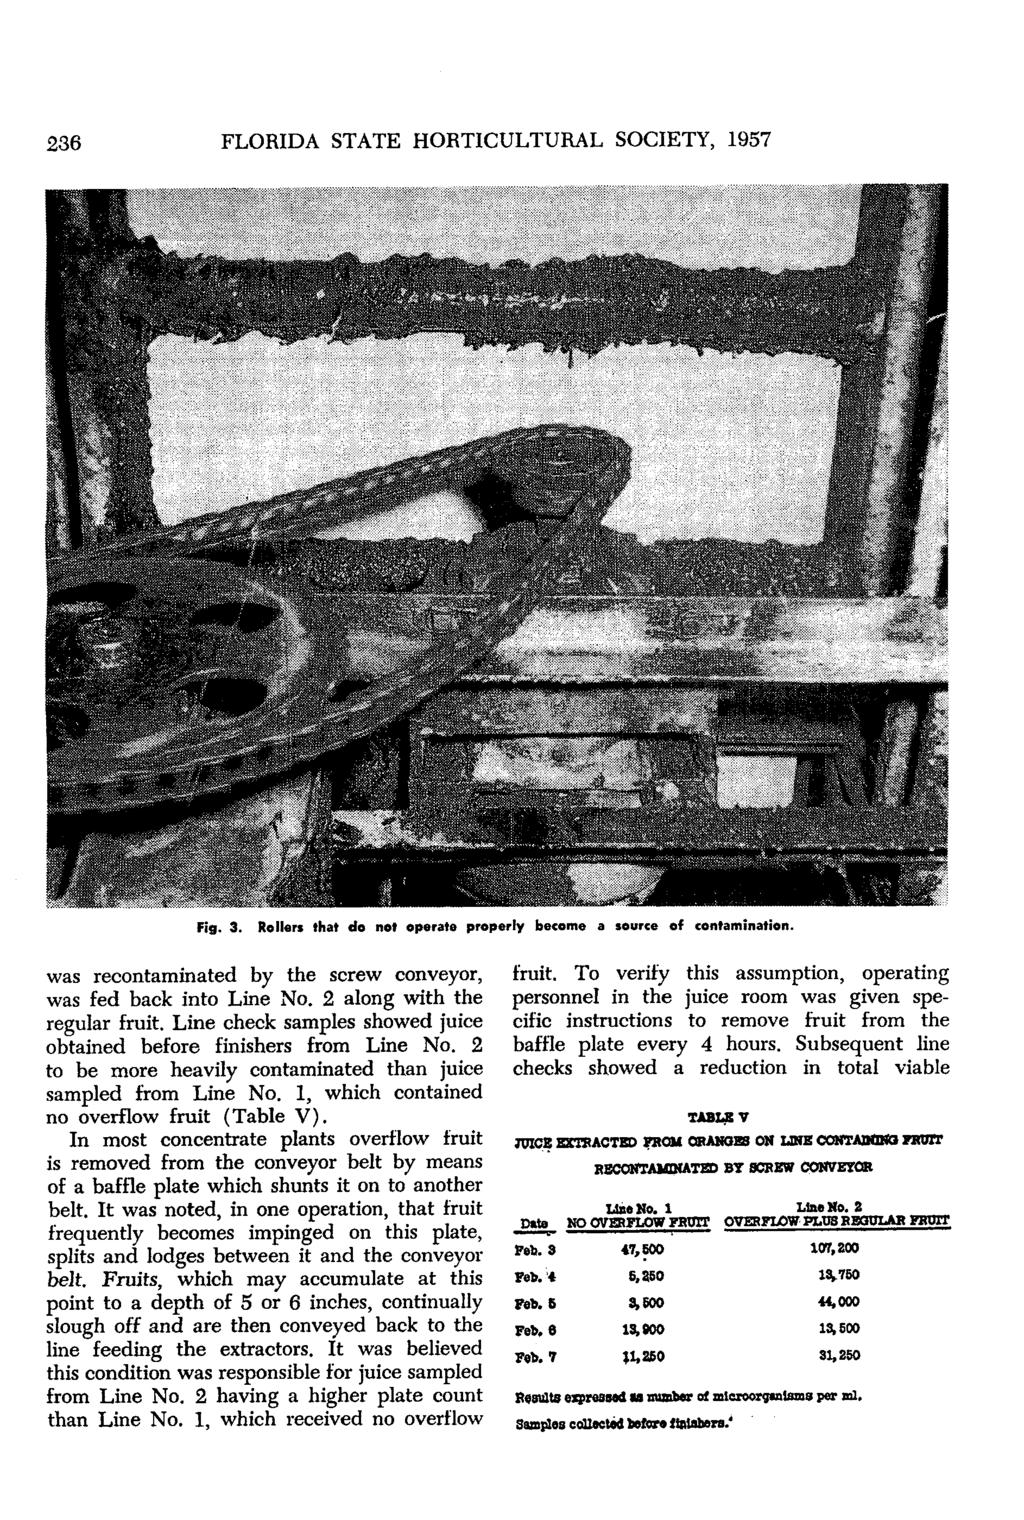 236 FLORIDA STATE HORTICULTURAL SOCIETY, 1957 Fig. 3. Rollers that do not operate properly become a source of contamination. was recontaminated by the screw conveyor, was fed back into Line No.